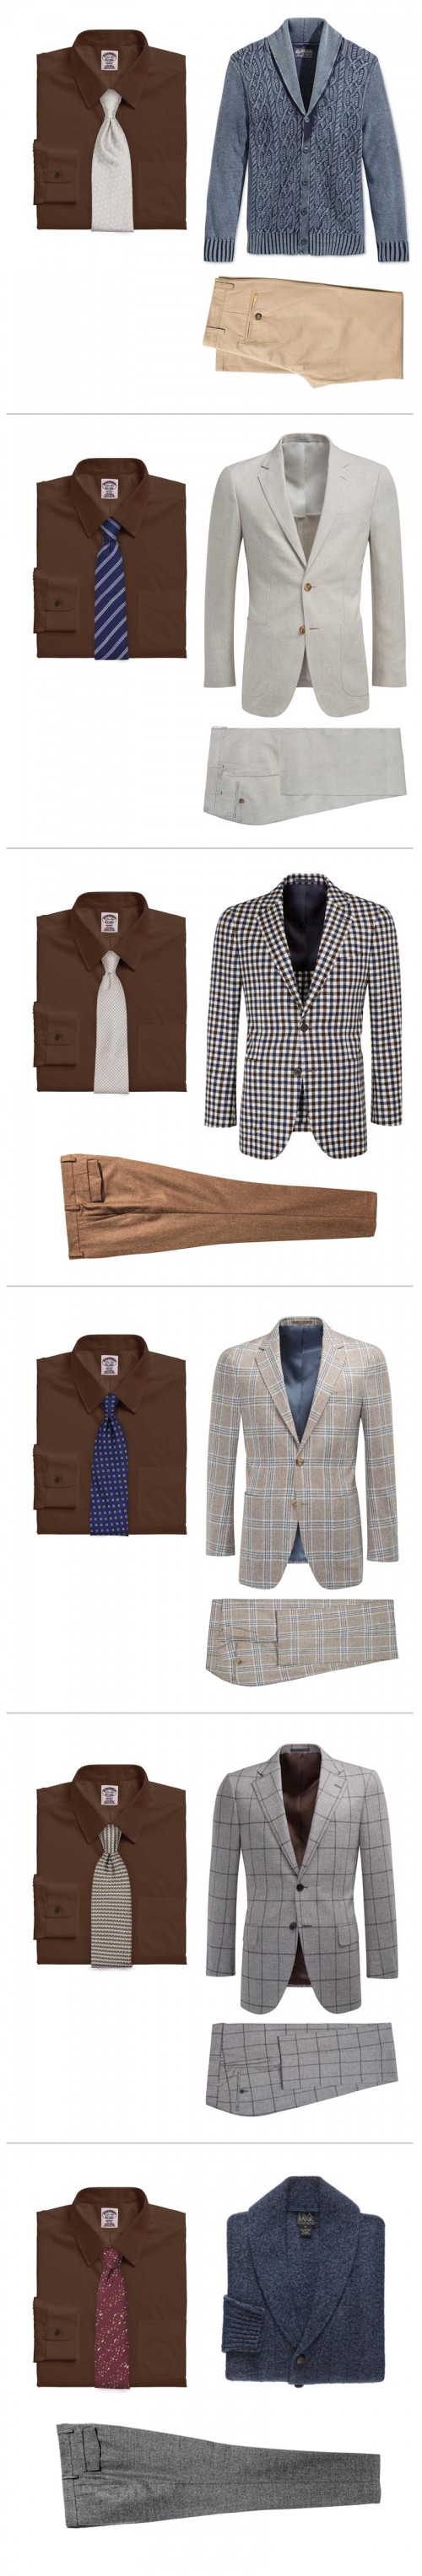 How To Wear A Brown Dress Shirt - 6 Looks for Men